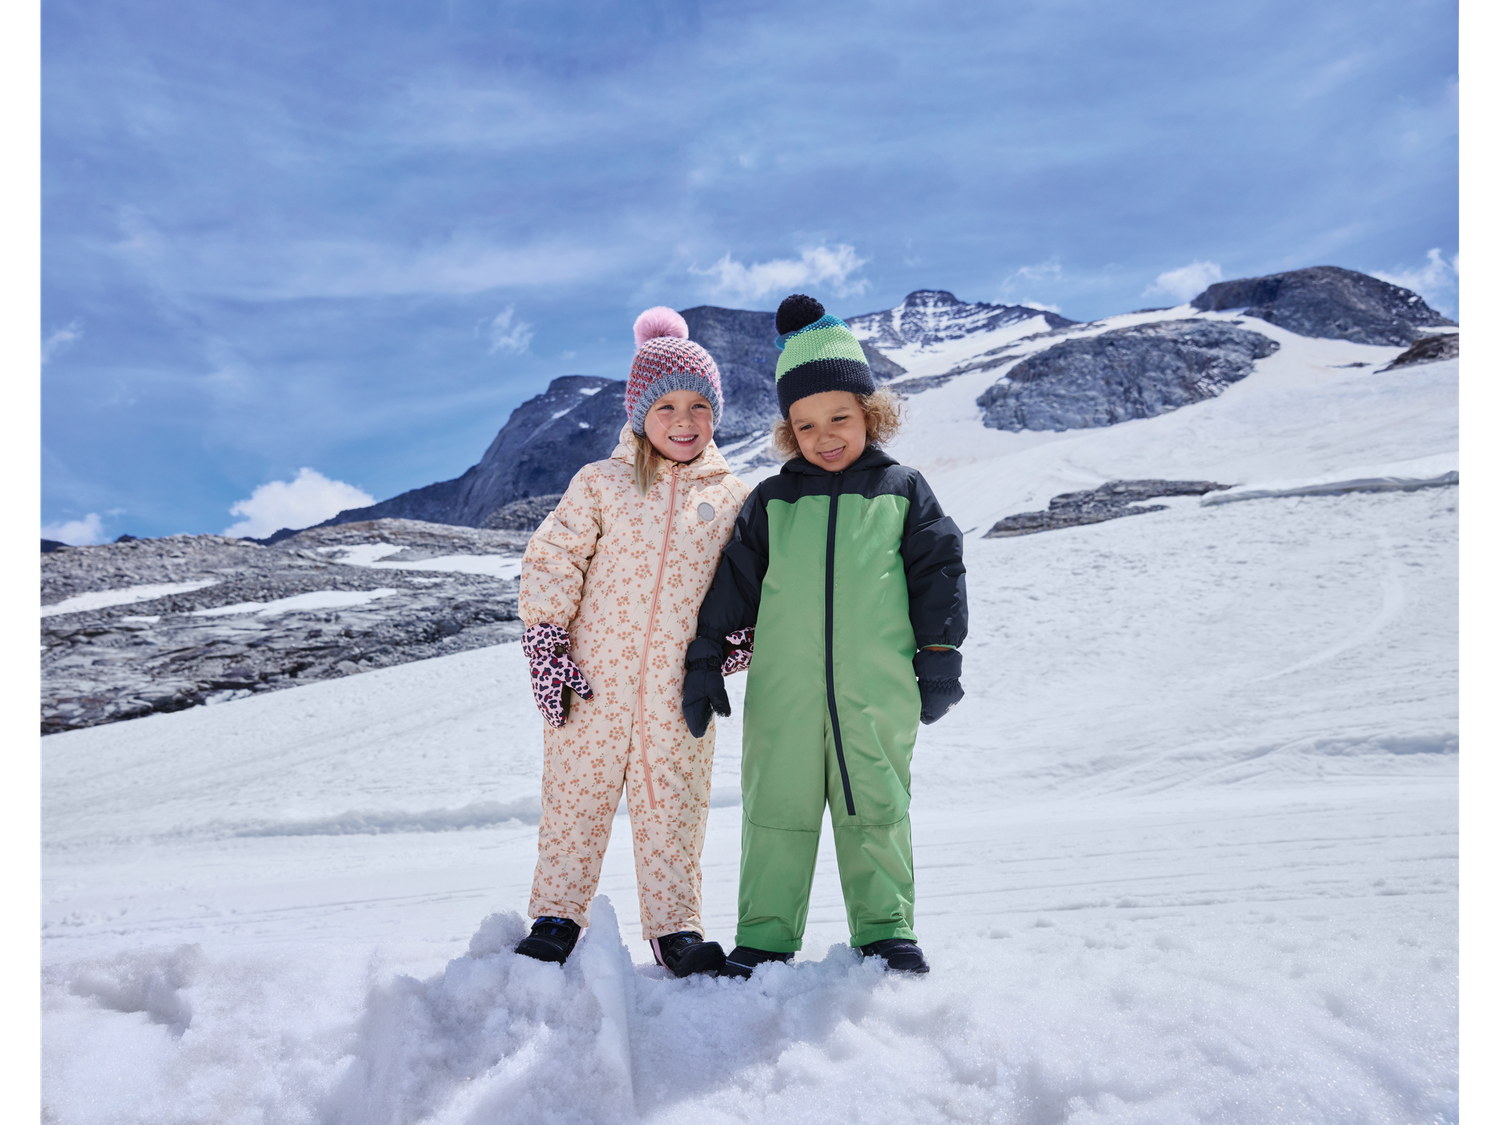 Get Suited And Booted This Ski Season With Lidl